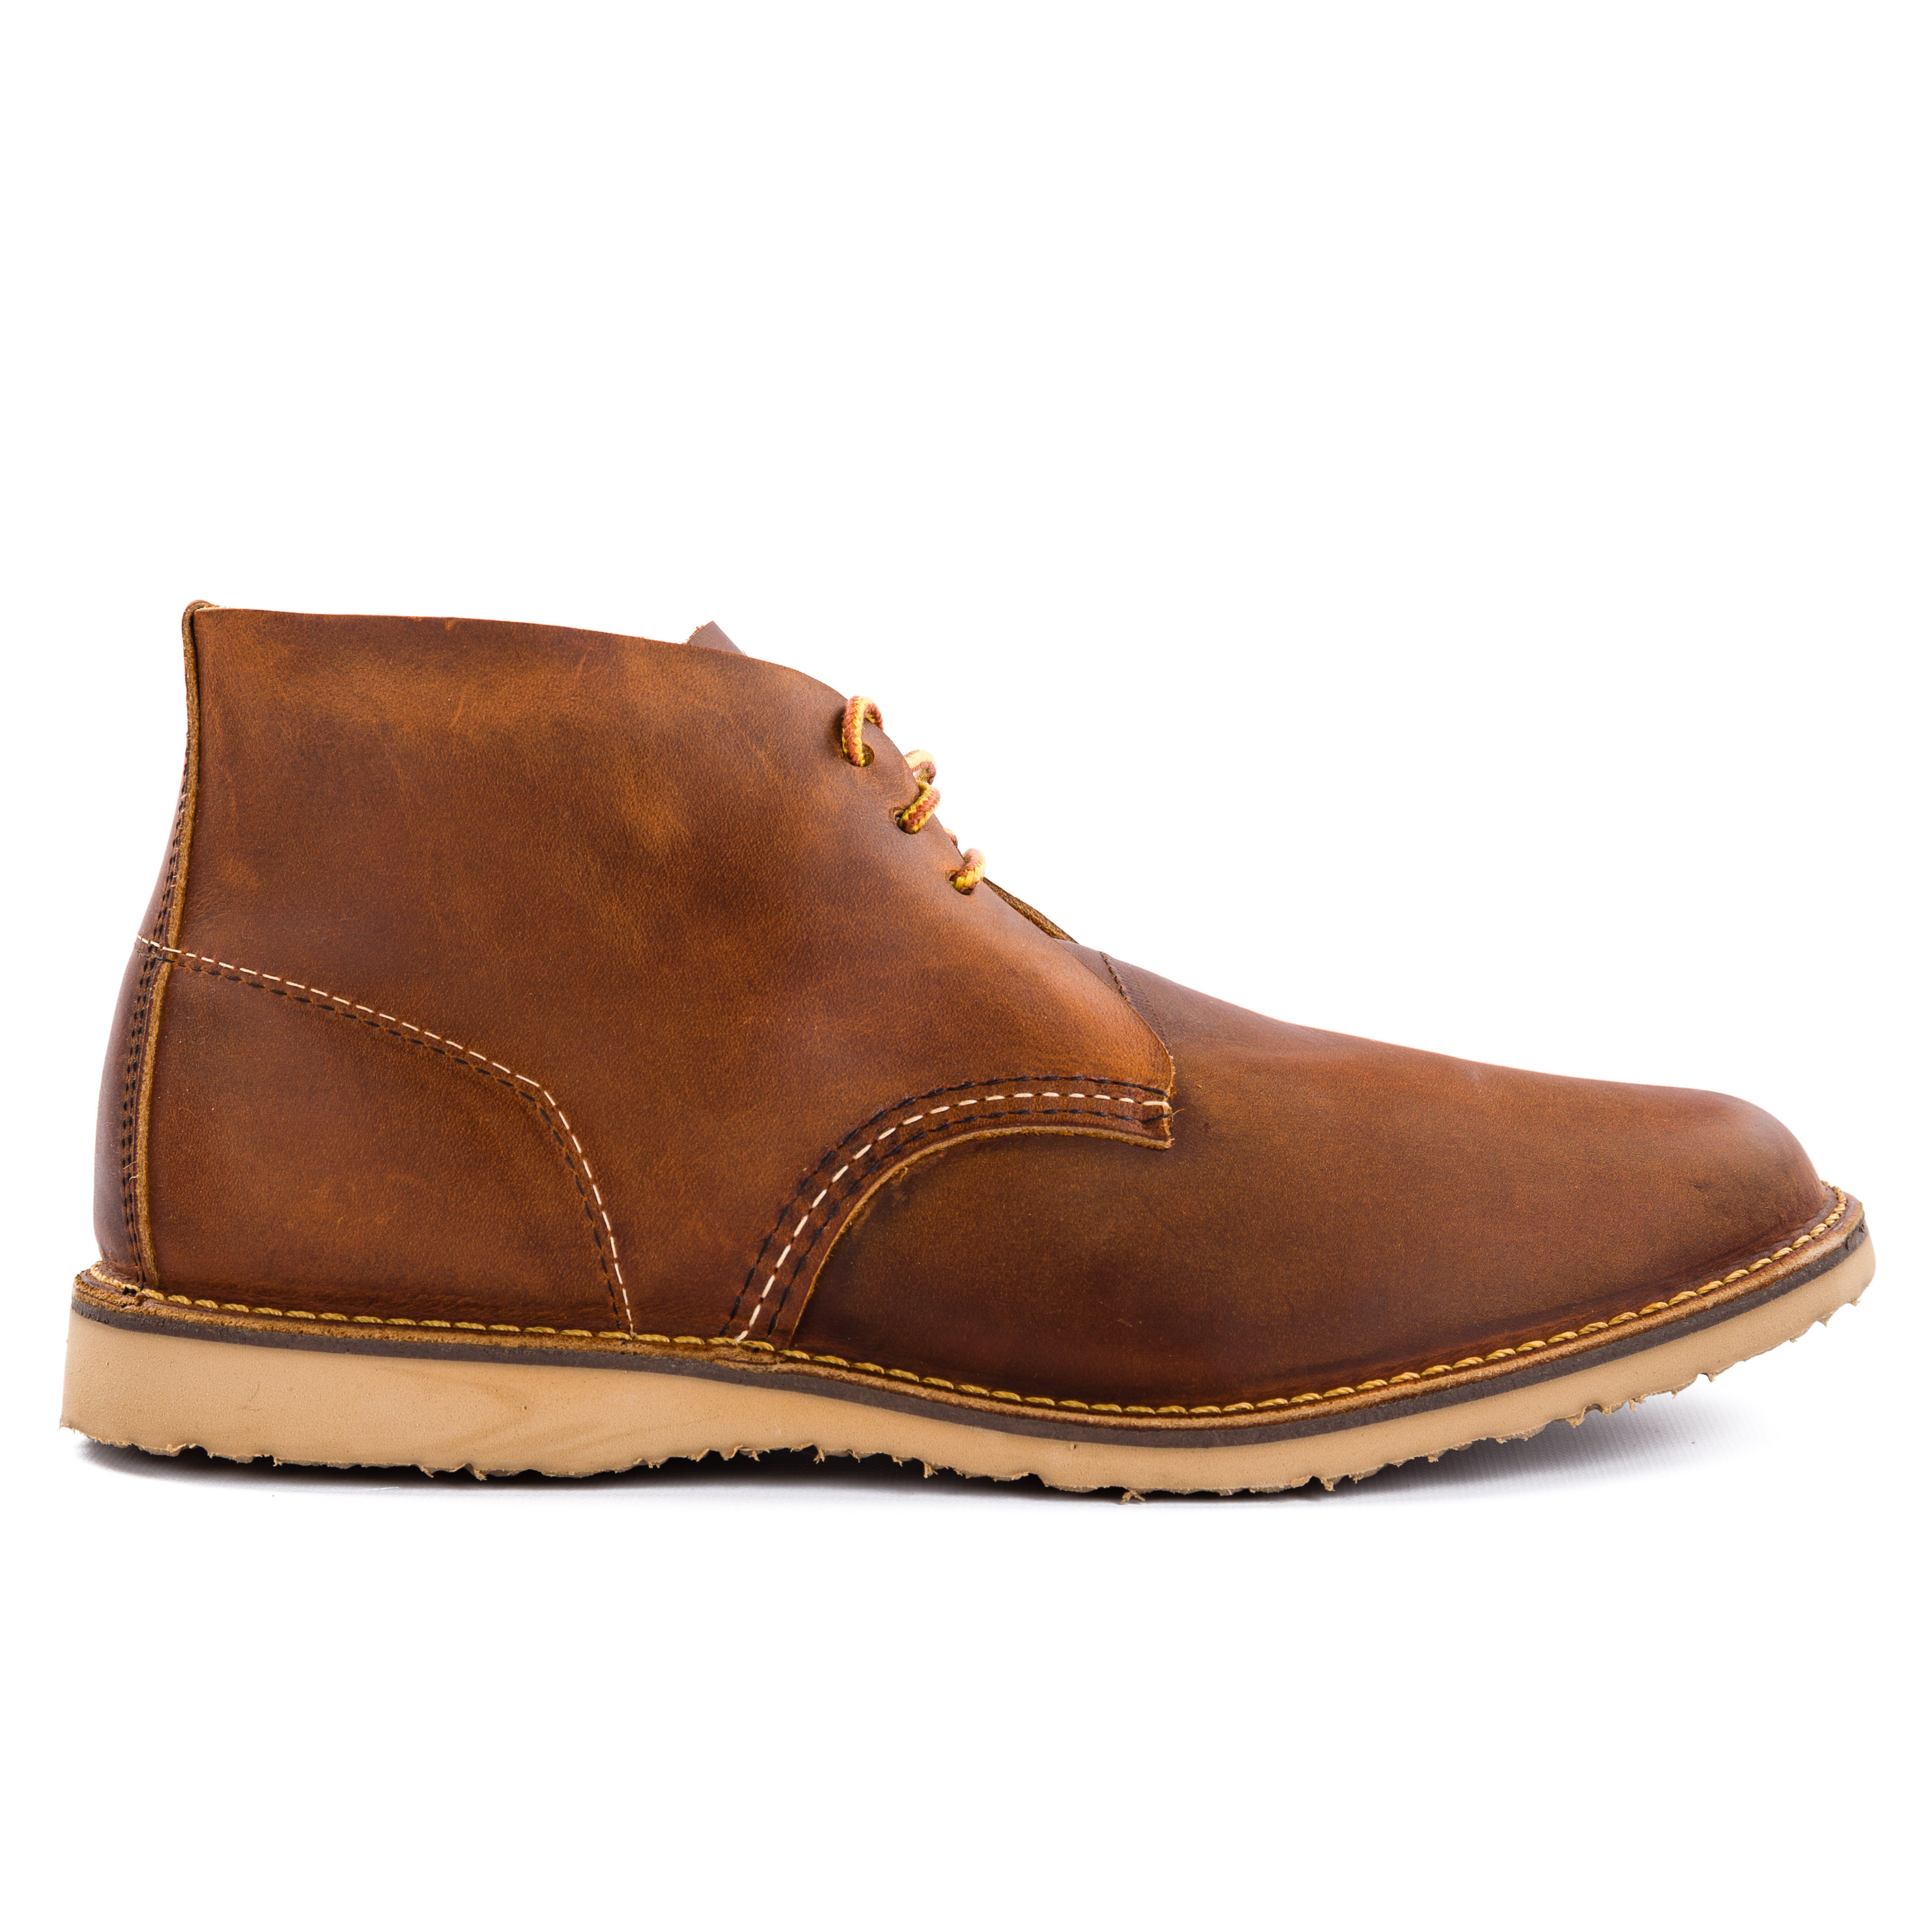 huckberry red wing